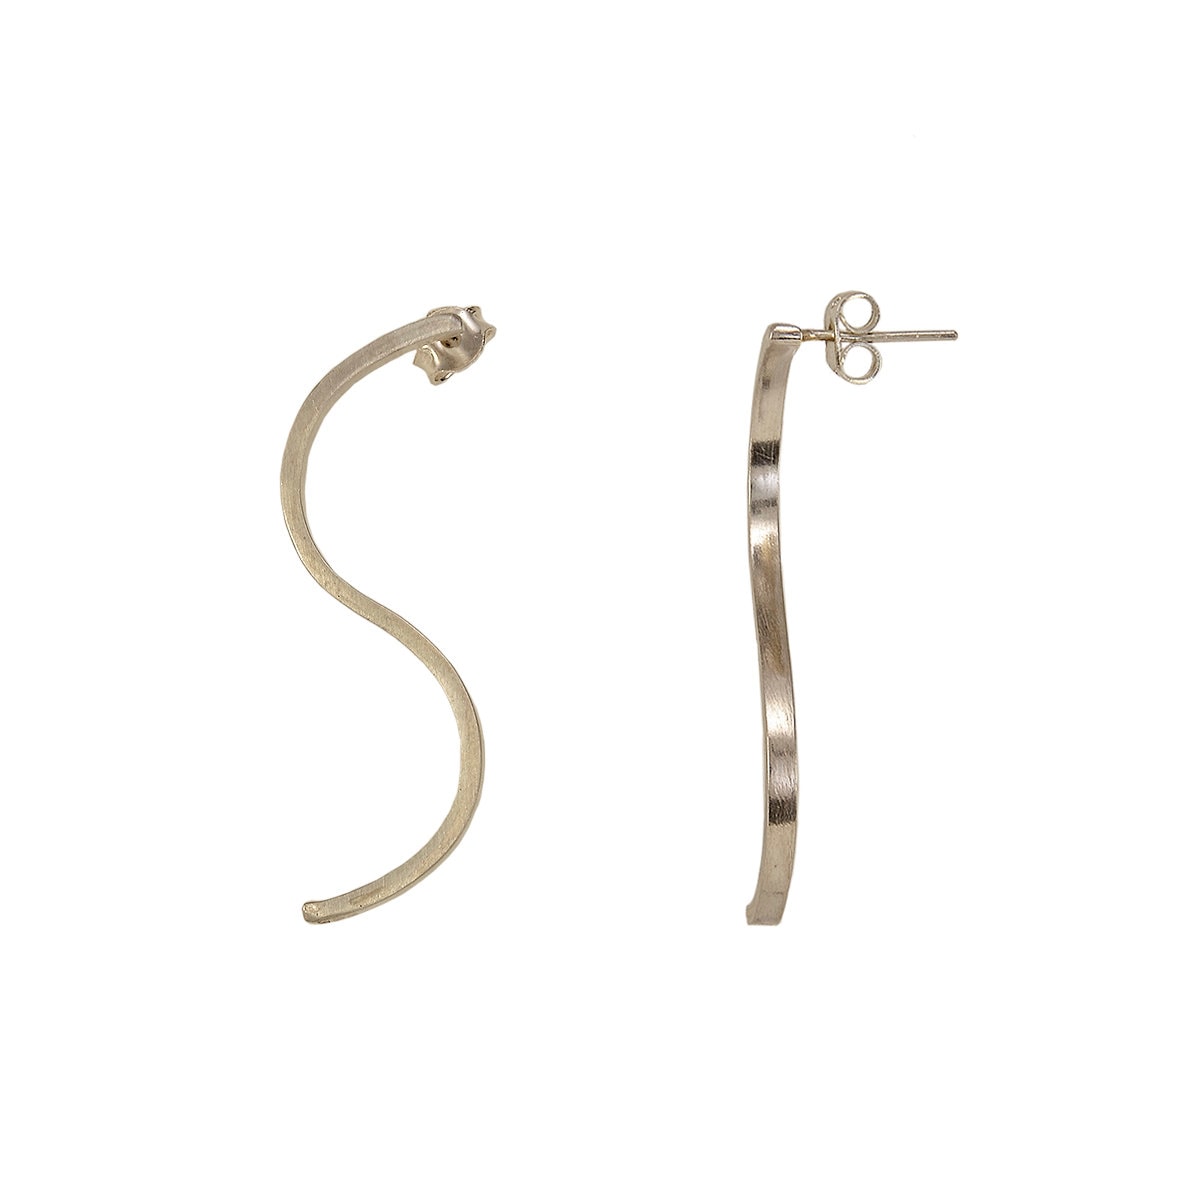 Complete your  classy syle with these minimalist sterling silver bar stud earrings, now 20% OFF and with FREE shipping !  etsy.me/3EFjIdT #silverearrings  #barearrings #minimaliststyle #minimalistjewelry #longstuds #Colorlatinojewelry